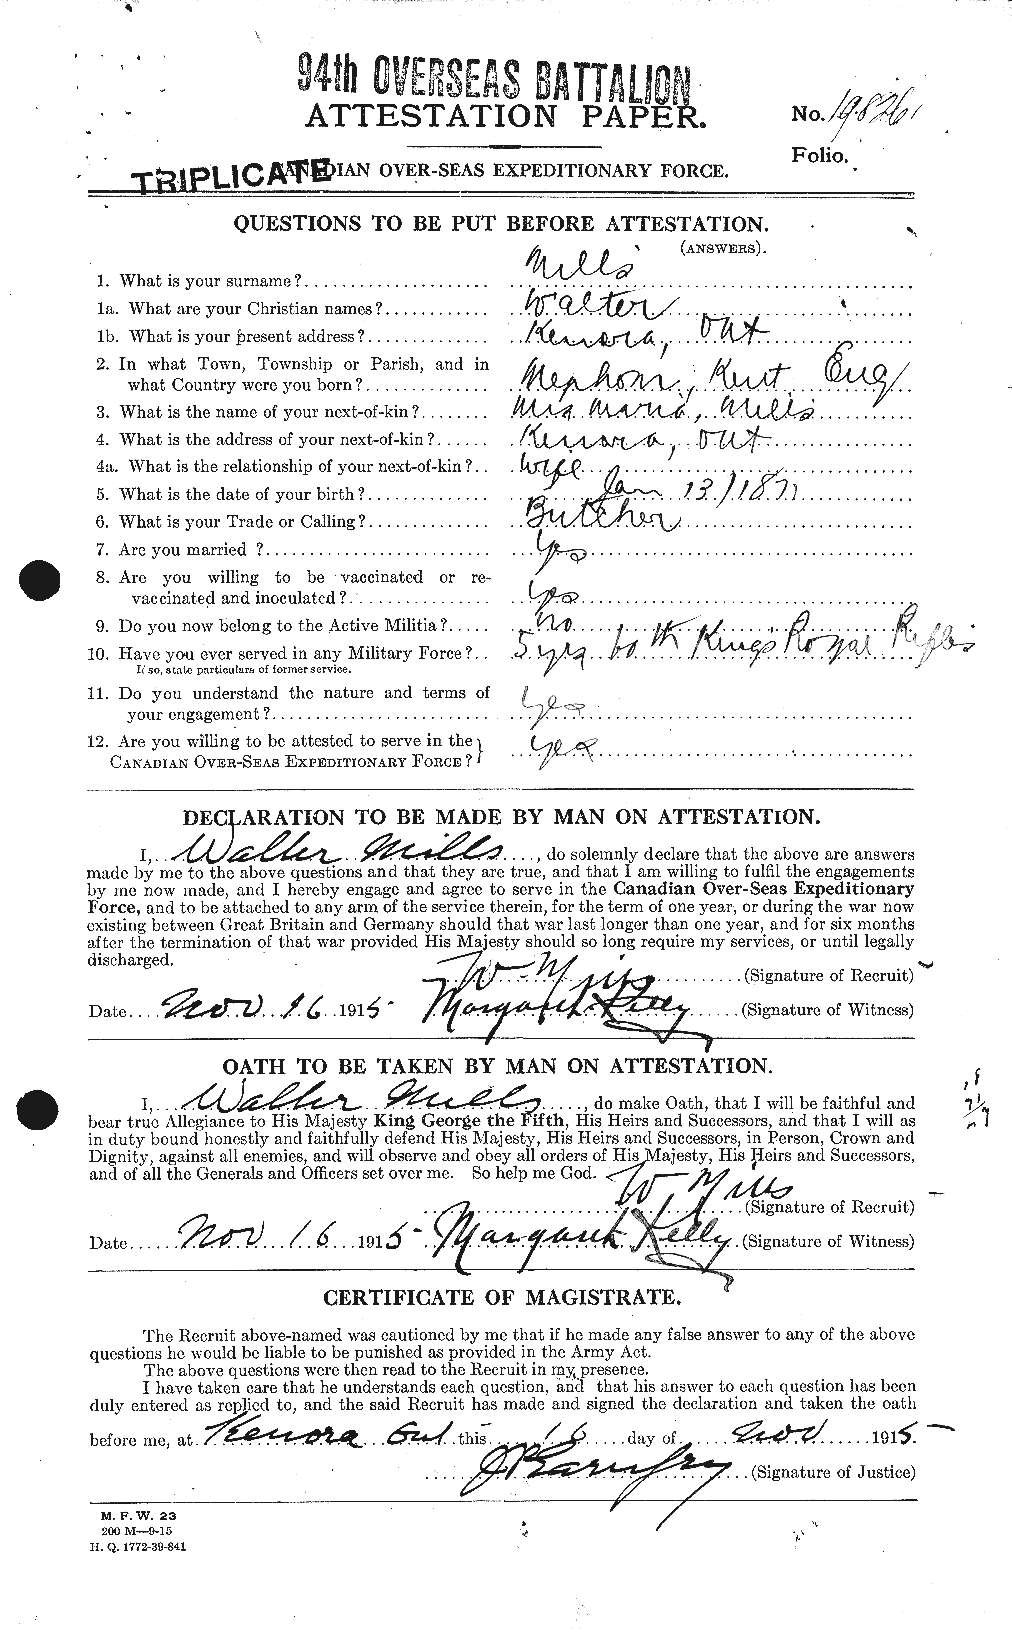 Personnel Records of the First World War - CEF 499251a